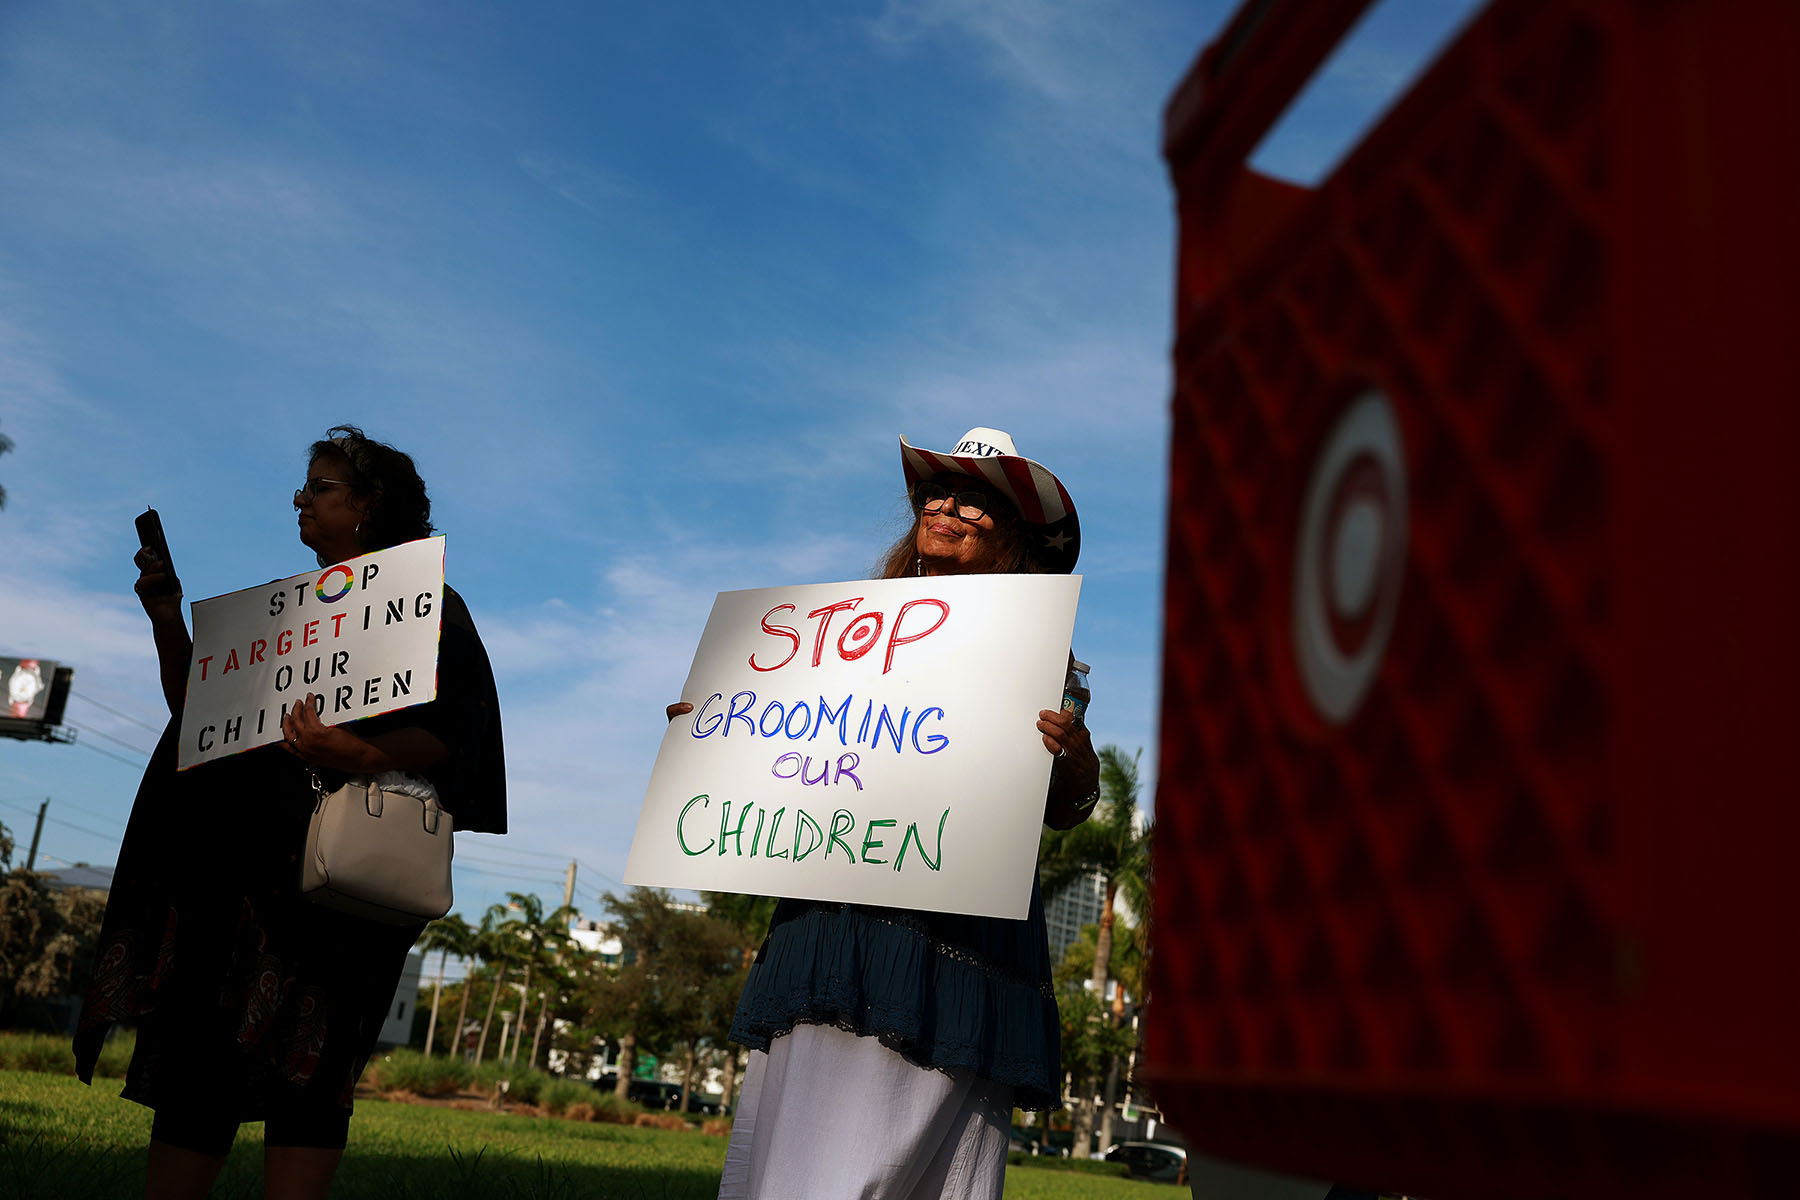 People protest Target's Pride Month merchandise outside of a Target store in Miami. They hold signs that read "Stop targeting our children" and "Stop grooming our children."